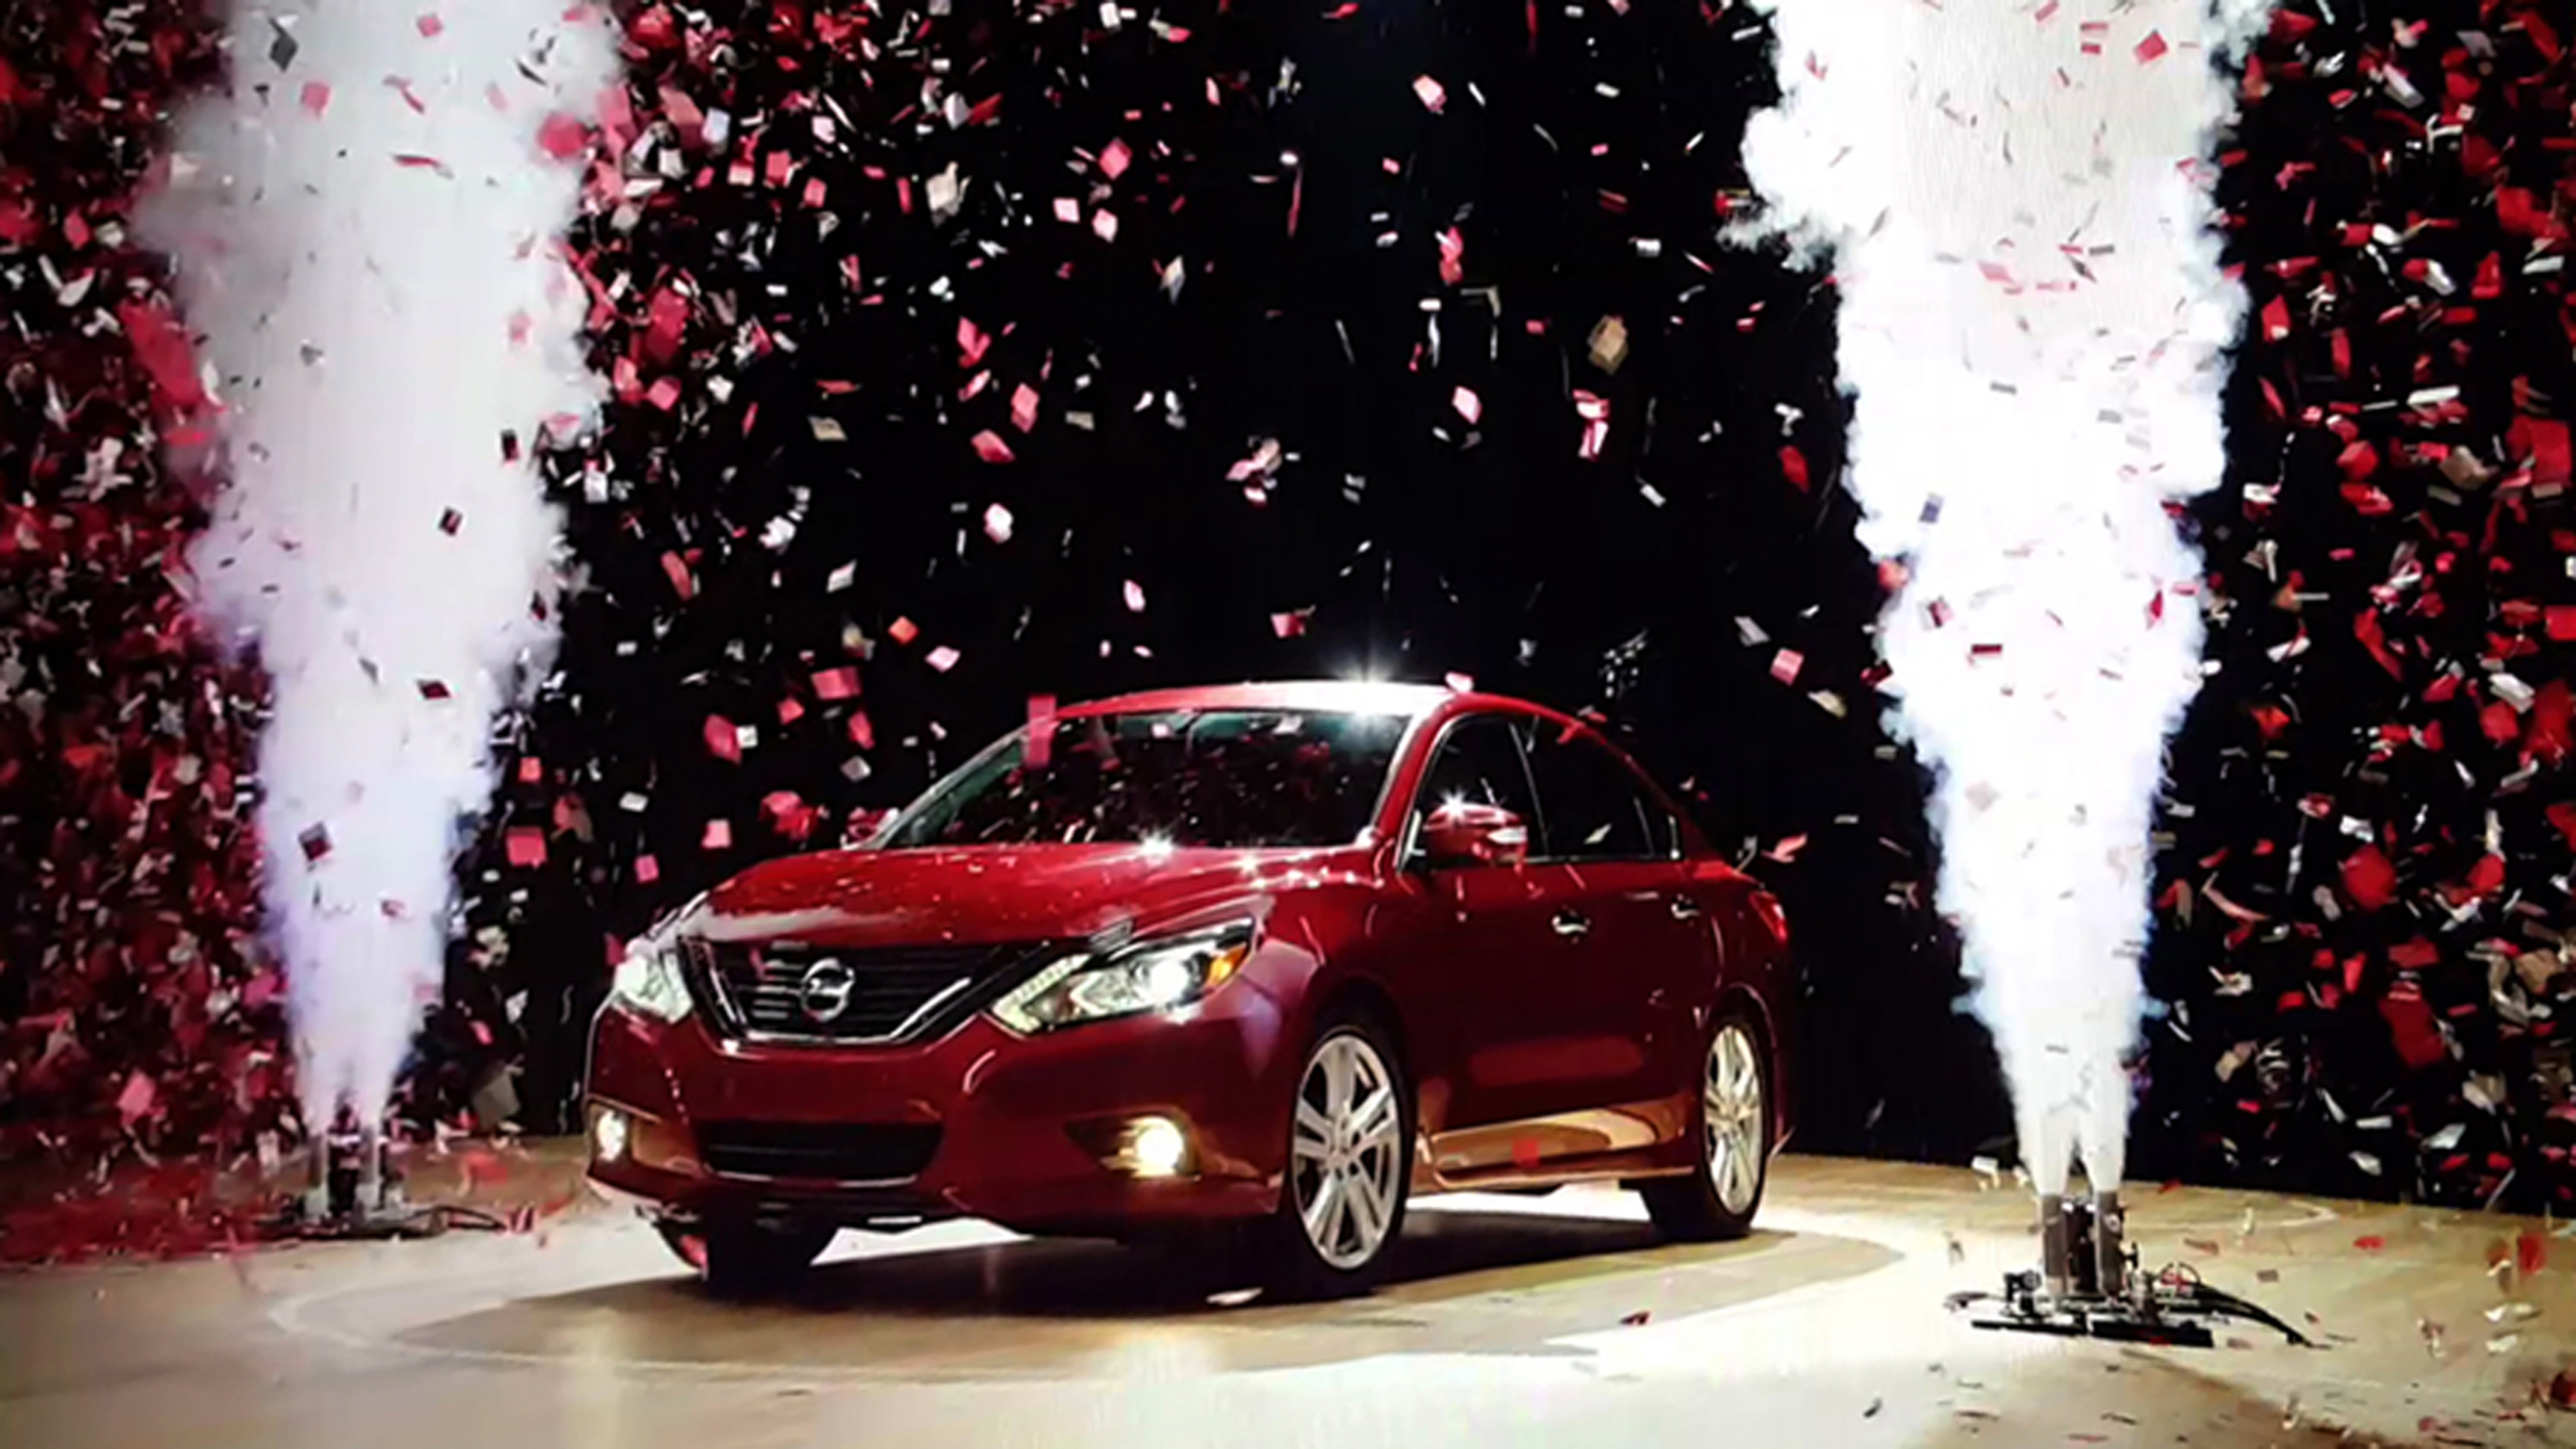 Dynamic Water and Confetti Effects for Nissan Altima Commercials Were  Created by Special Effects Team at TLC | Newswire